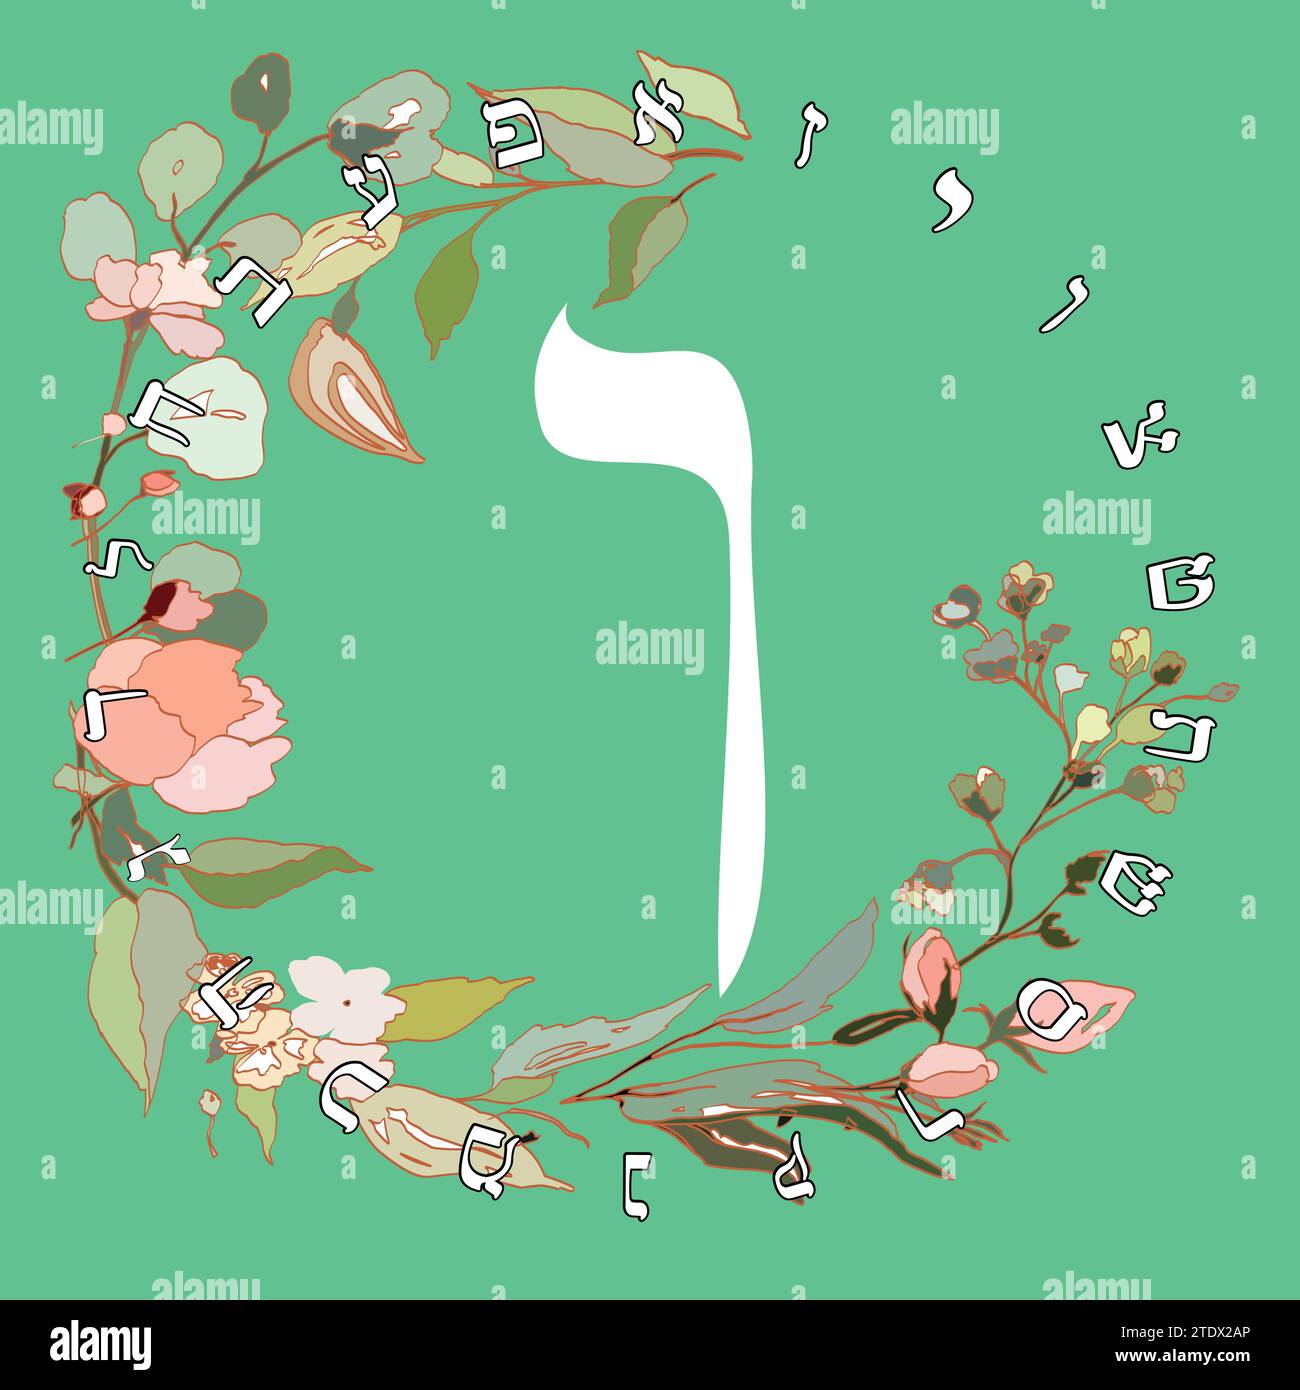 Vector illustration of the Hebrew alphabet with floral design. Hebrew letter called Vav white on green background. Stock Vector